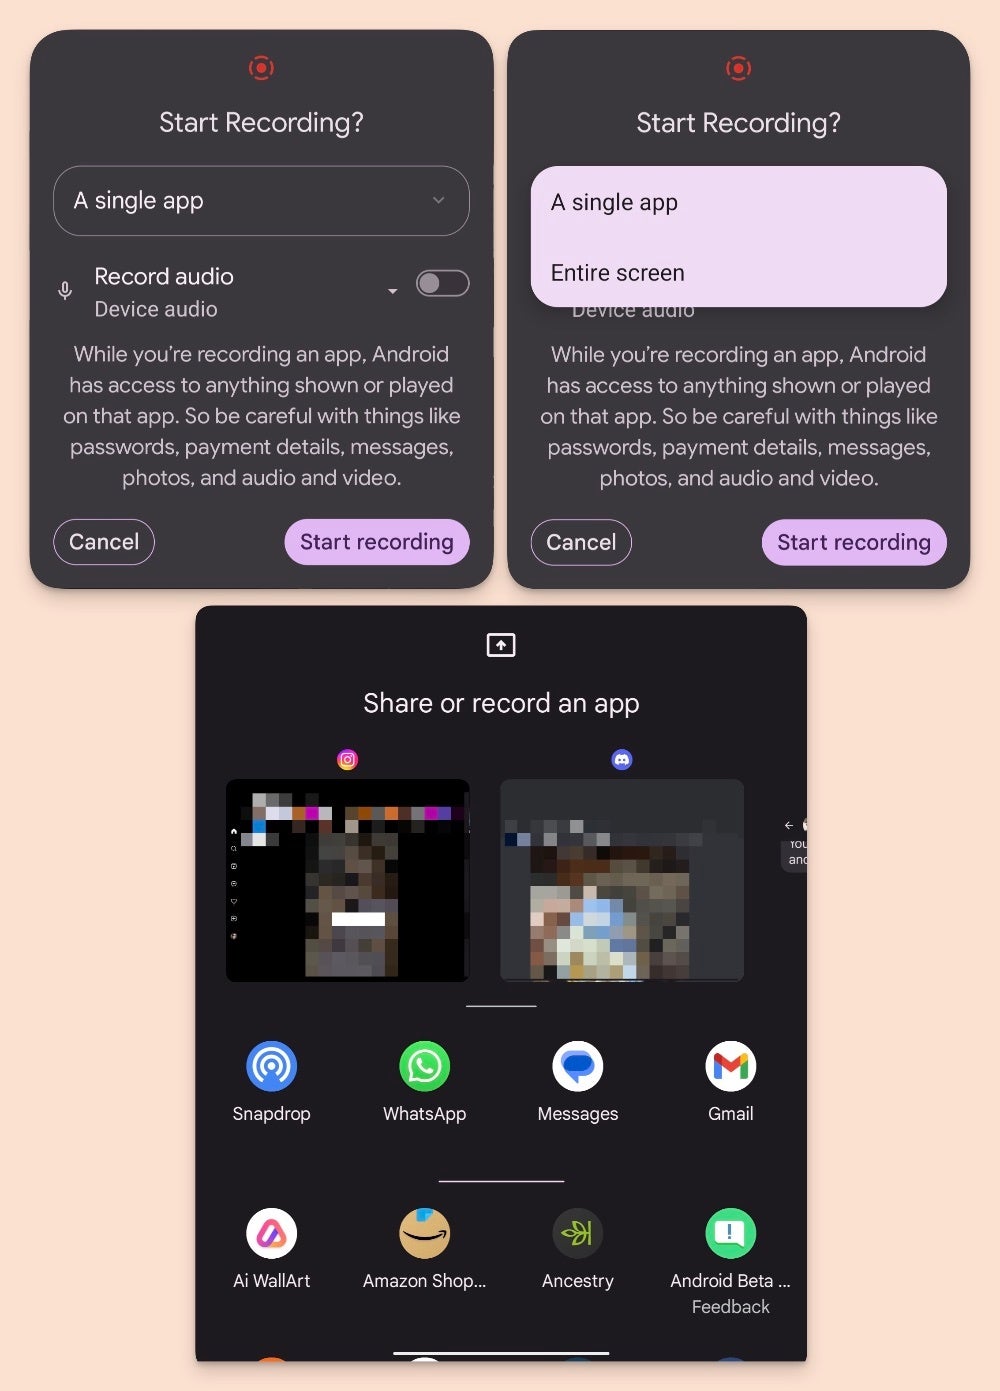 Android 14 single app recording prompts - Latest Android 14 beta debuts "single-app" casting and screen recording feature on Pixel devices